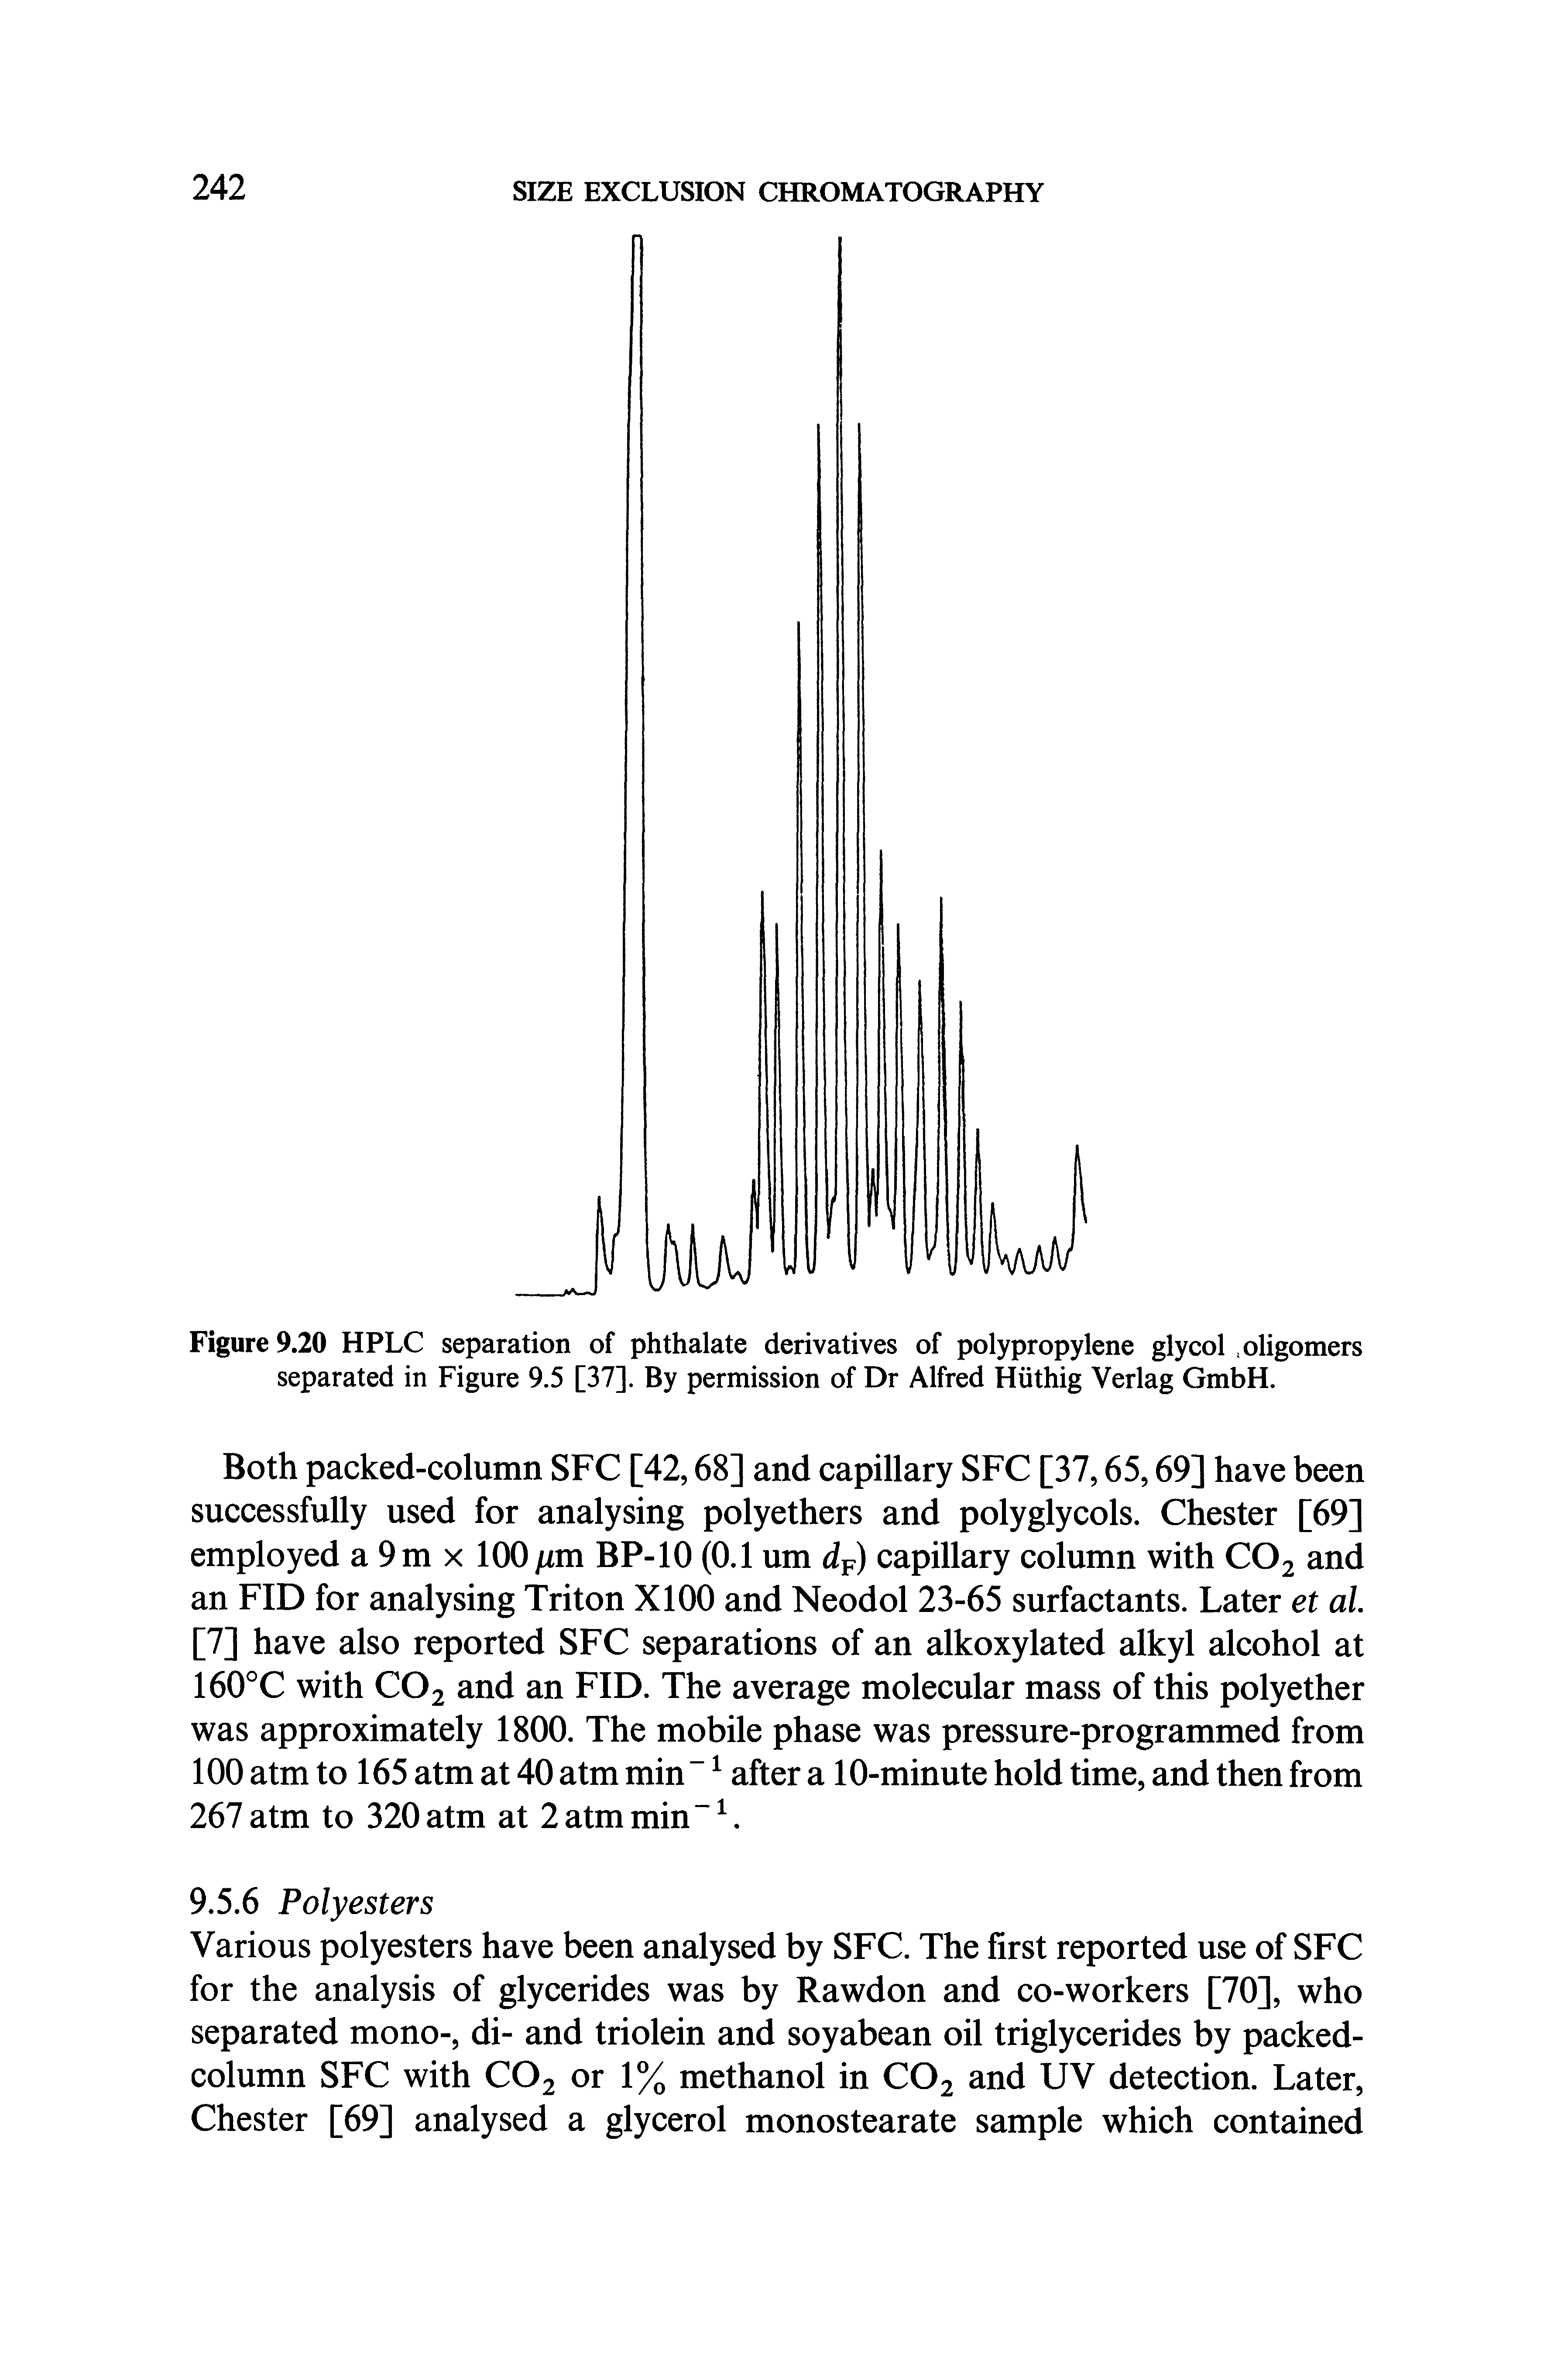 Figure 9.20 HPLC separation of phthalate derivatives of polypropylene glycol. oligomers separated in Figure 9.5 [37]. By permission of Dr Alfred Hiithig Verlag GmbH.